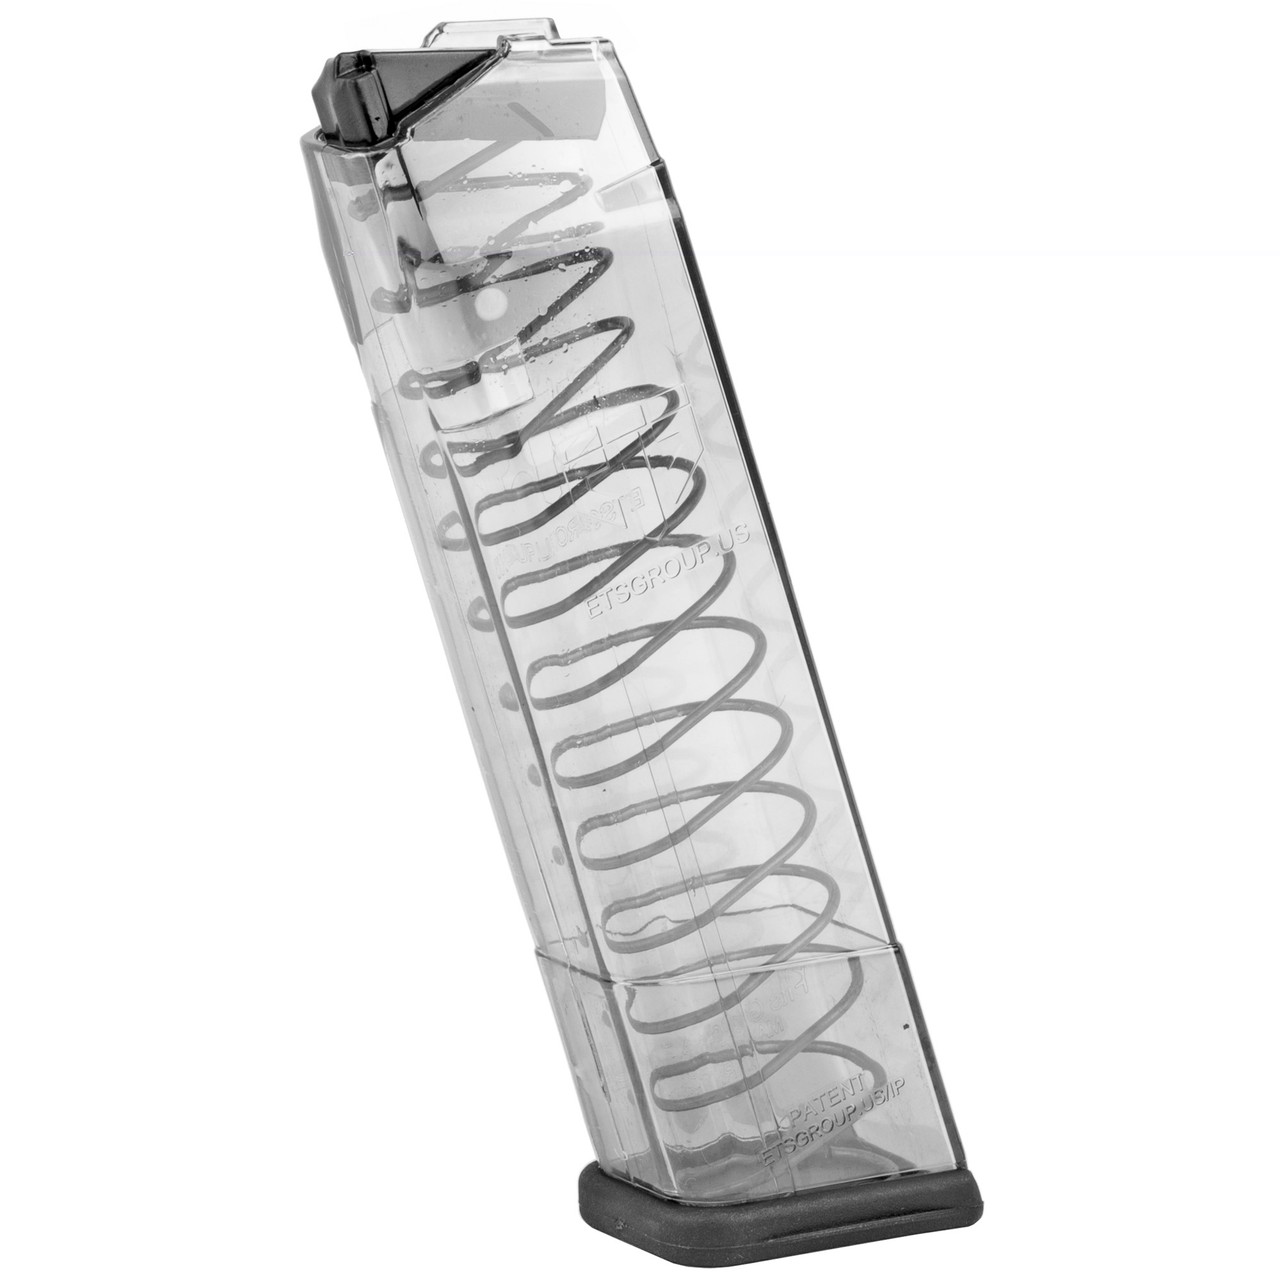 Elite Tactical Systems Group GLK-21-18 Magazine For Glk 21/30 45acp 18rd Clr